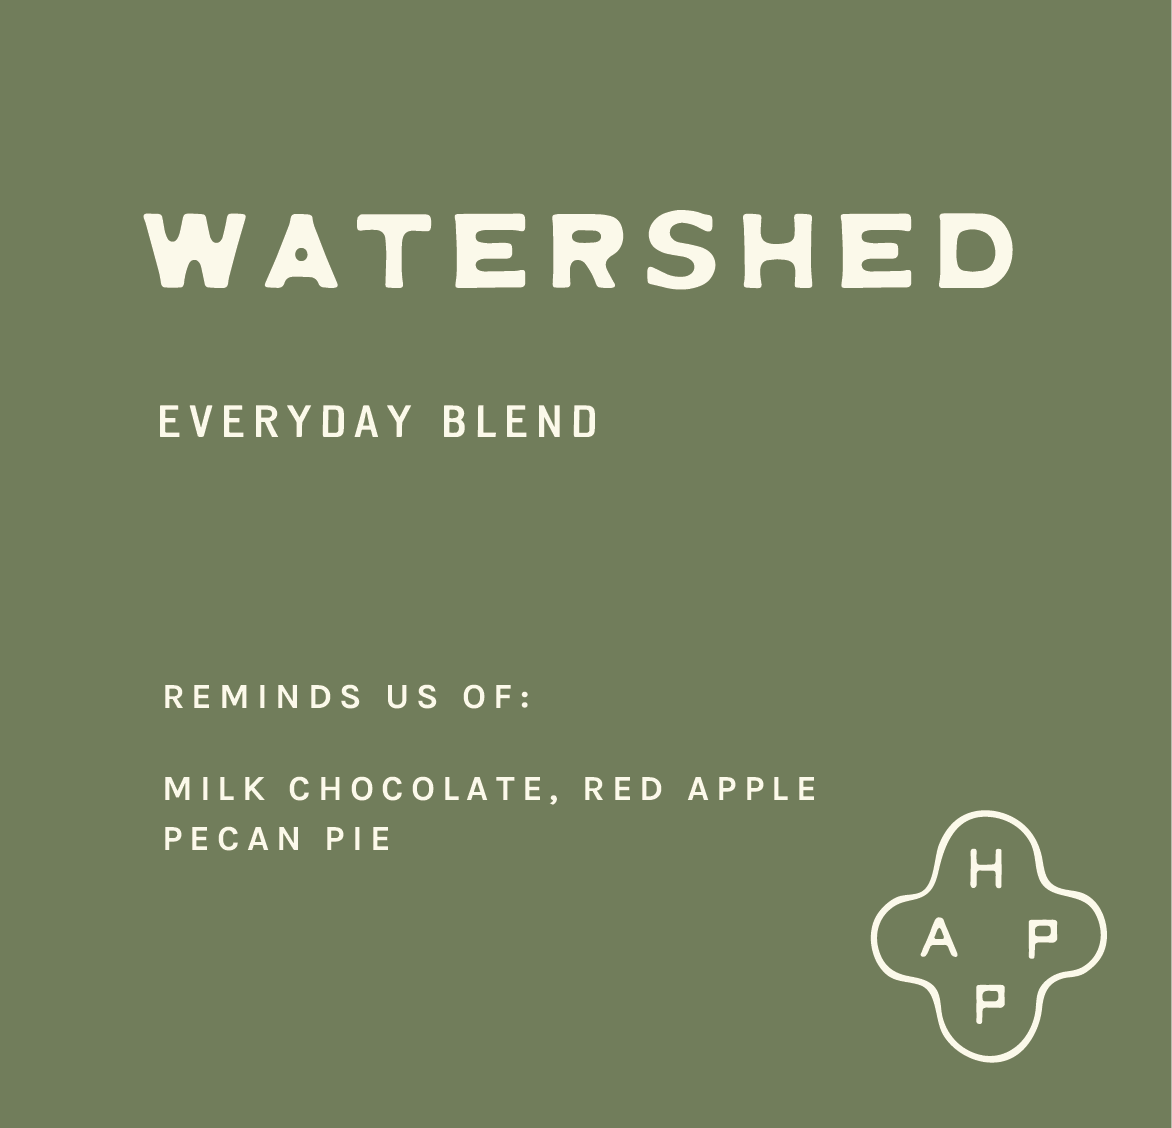 Watershed Everyday Blend